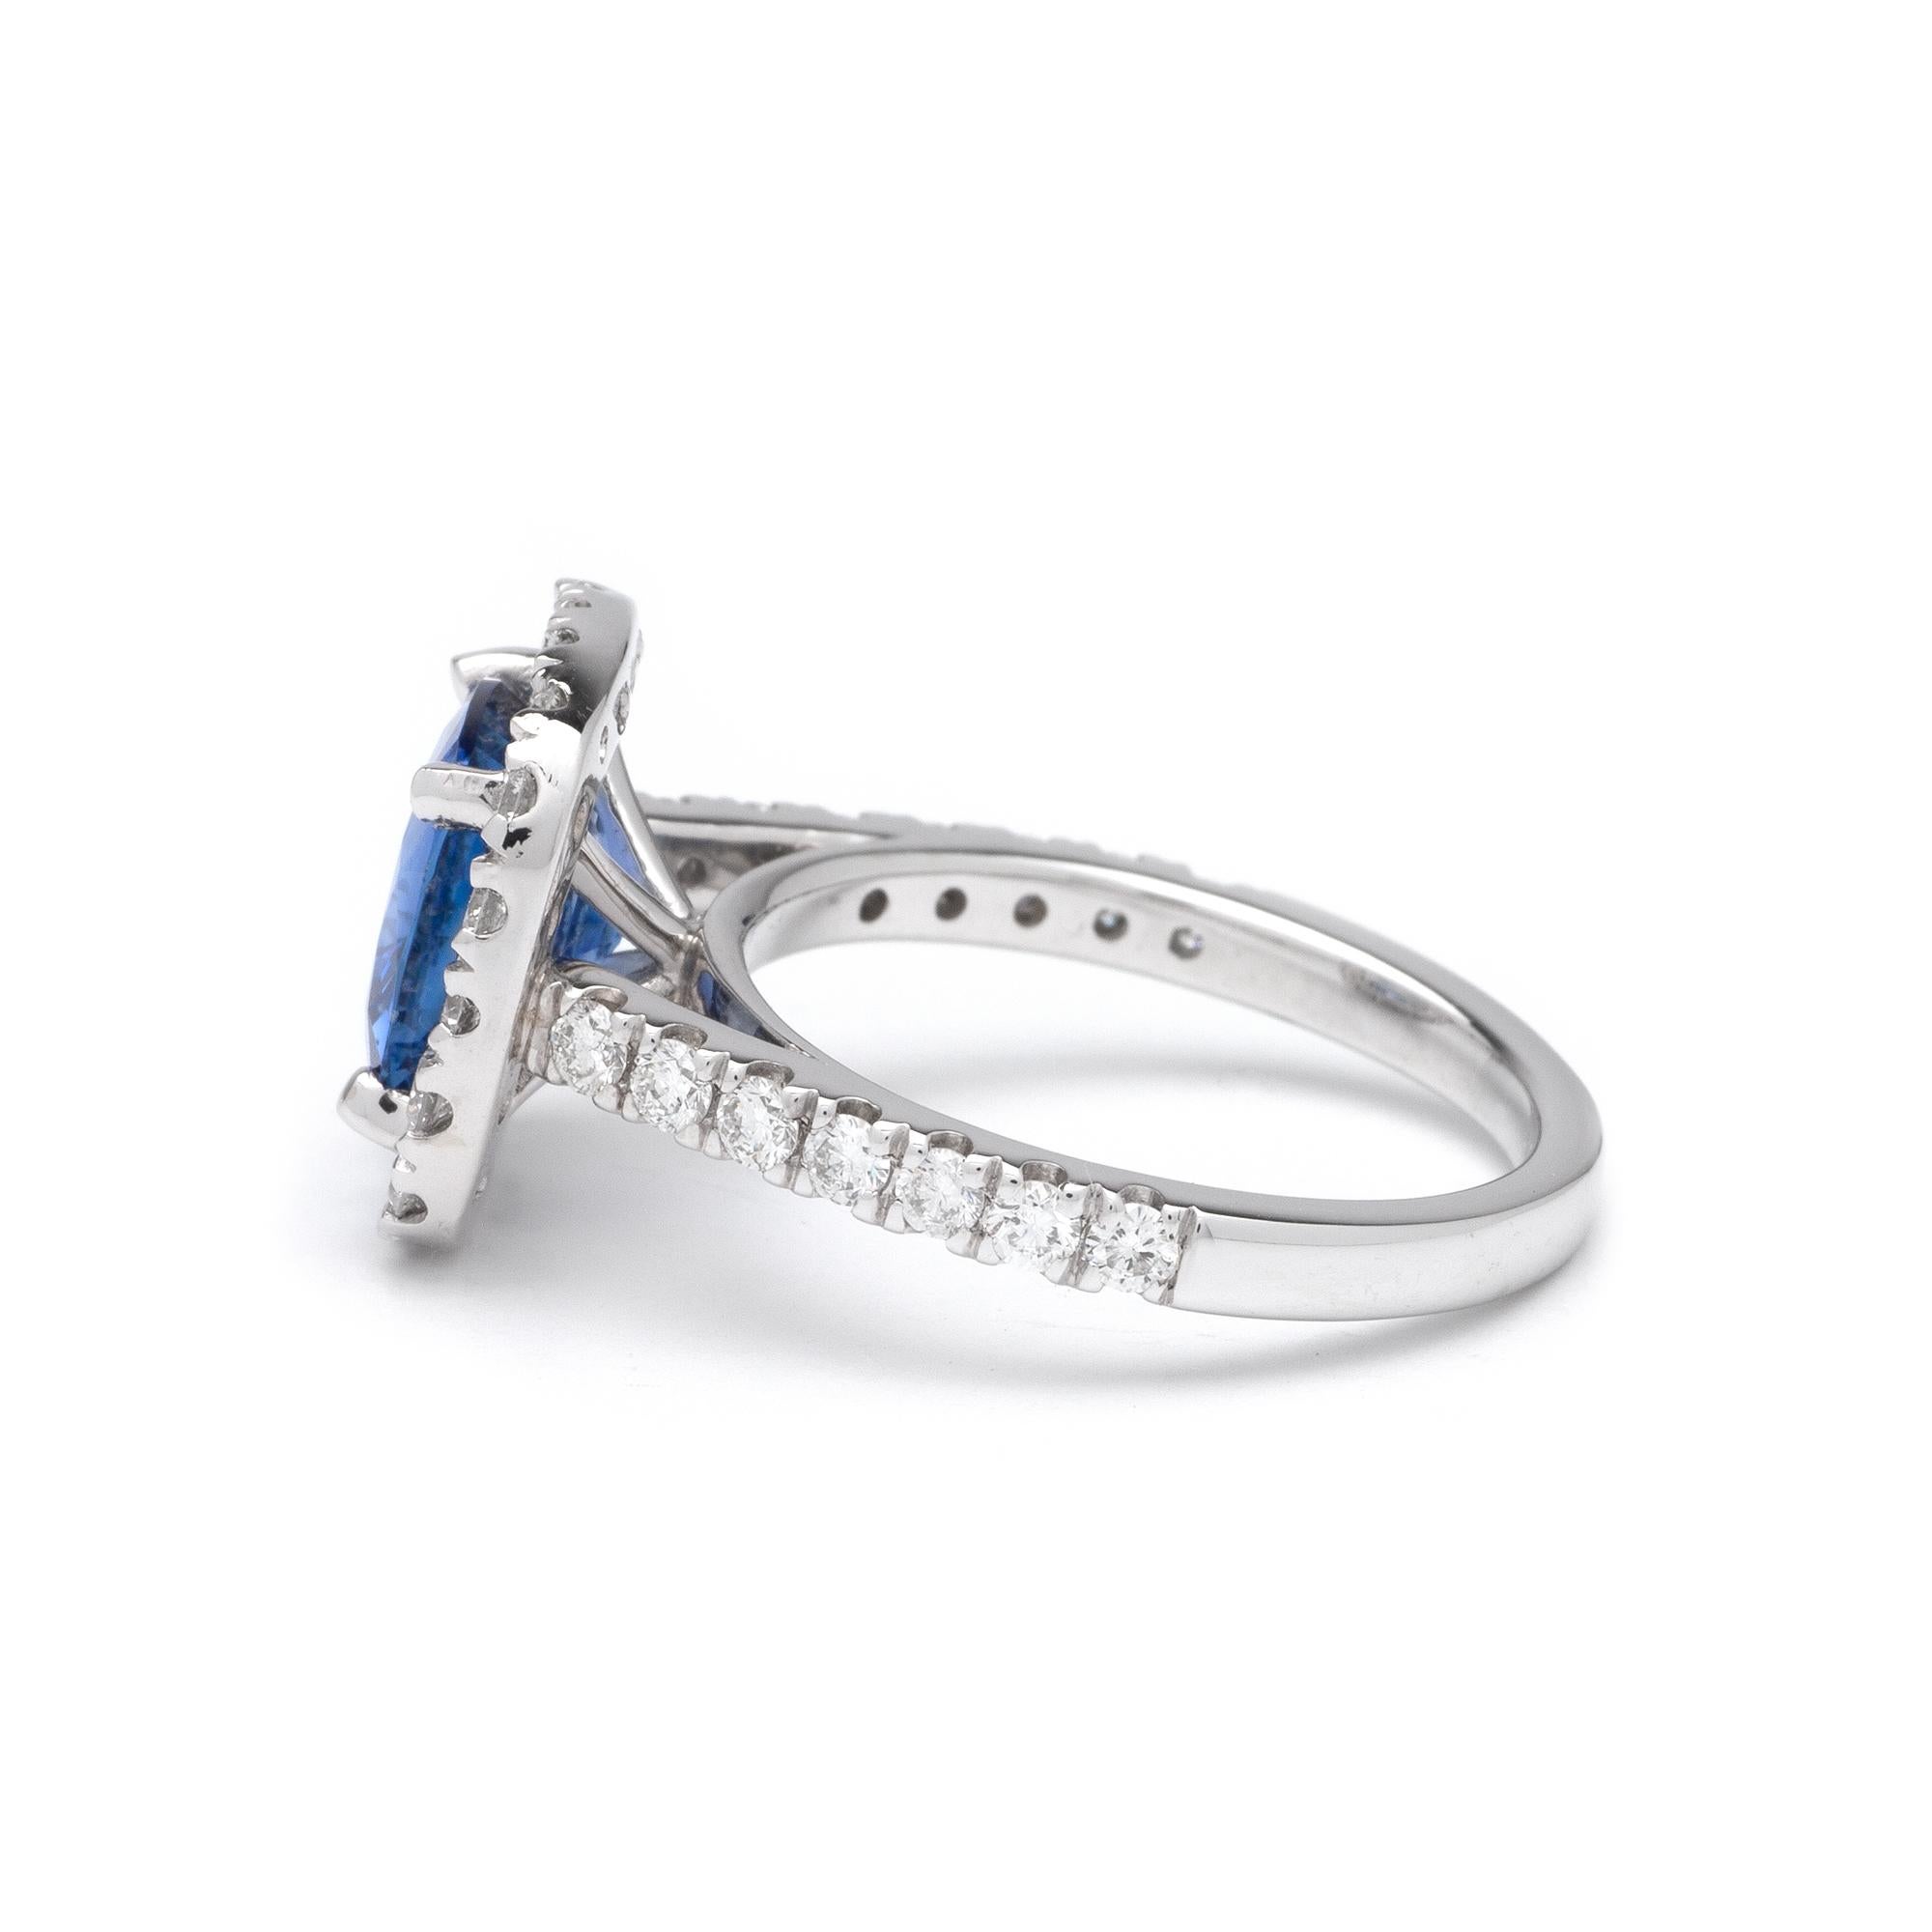 This ring features a halo design of G color, VS1 clarity, and 1.00ct Round side diamonds set in 14K white gold. The center gemstone is a 3.34ct Oval blue sapphire measuring 9.00 x 8.82mm. Finger size 6 1/2.